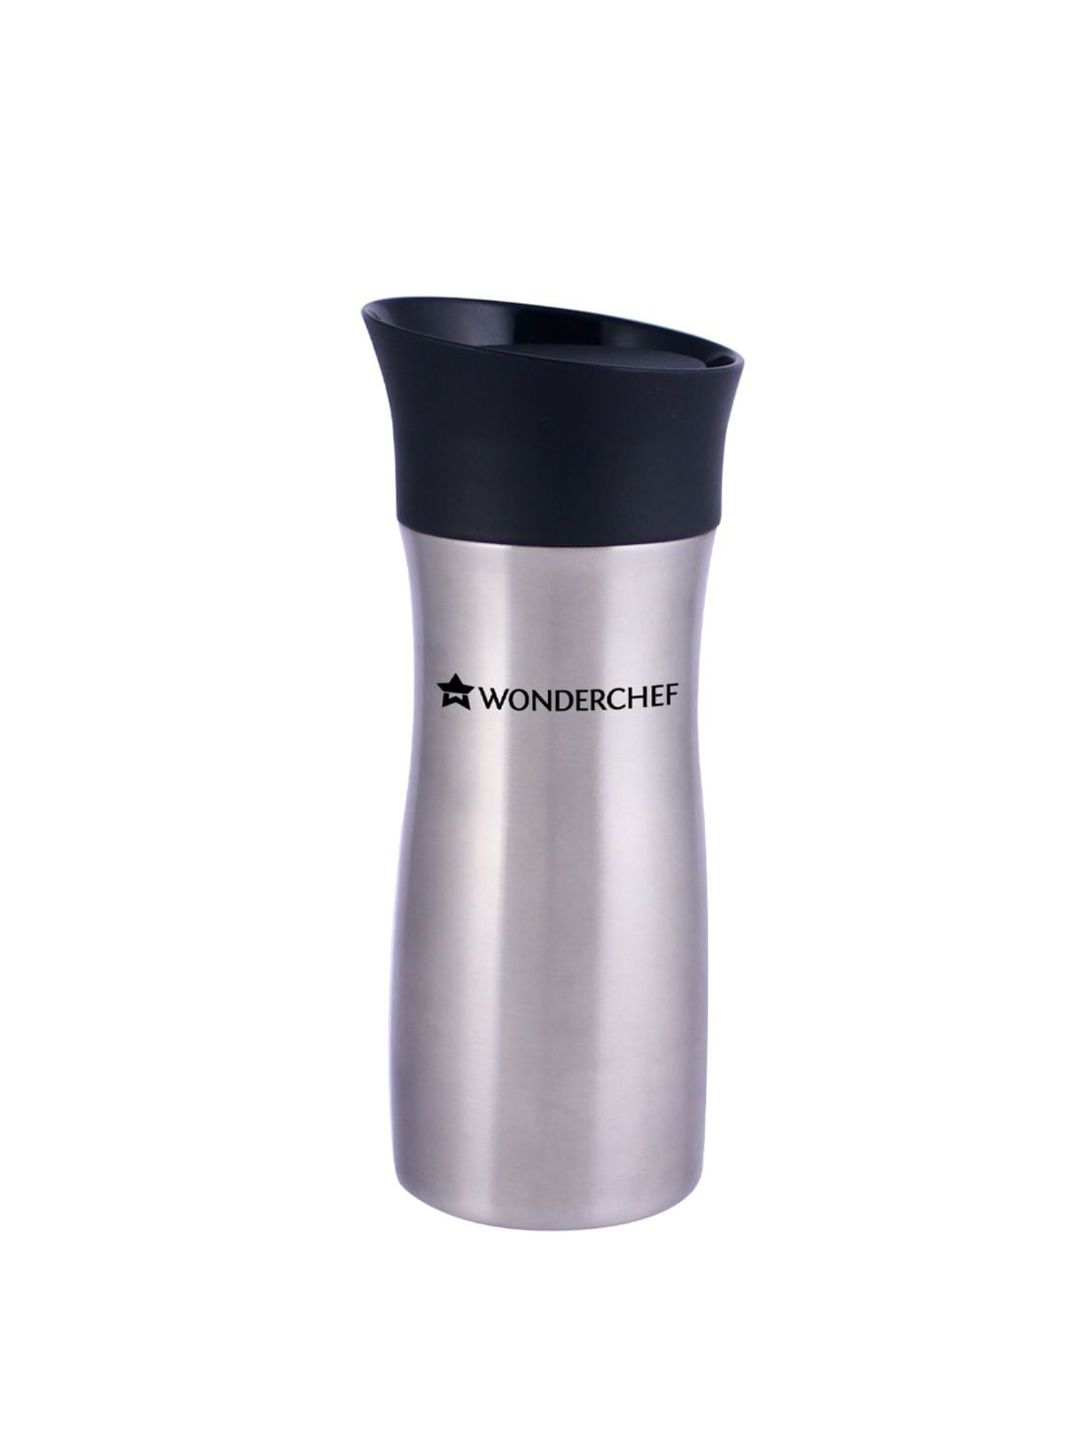 Wonderchef Travel Bot Double Wall Stainless Steel Hot and Cold Flask 300ml Price in India